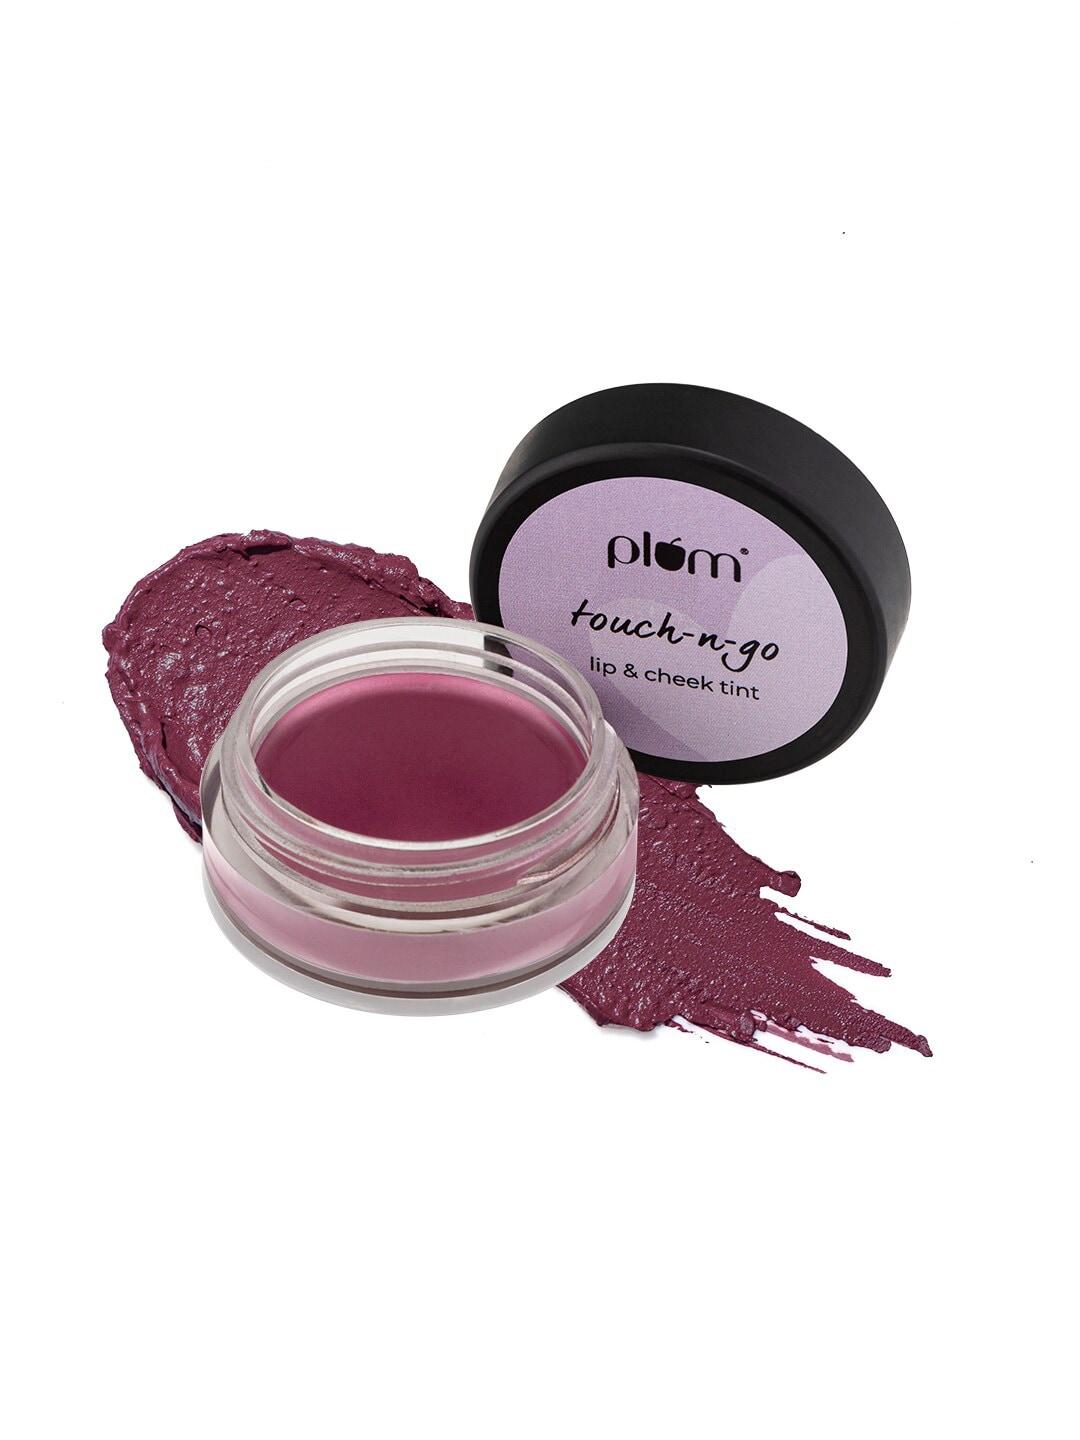 Plum Highly Pigmented Touch-N-Go Lip & Cheek Tint, 5g - D-Wine 125